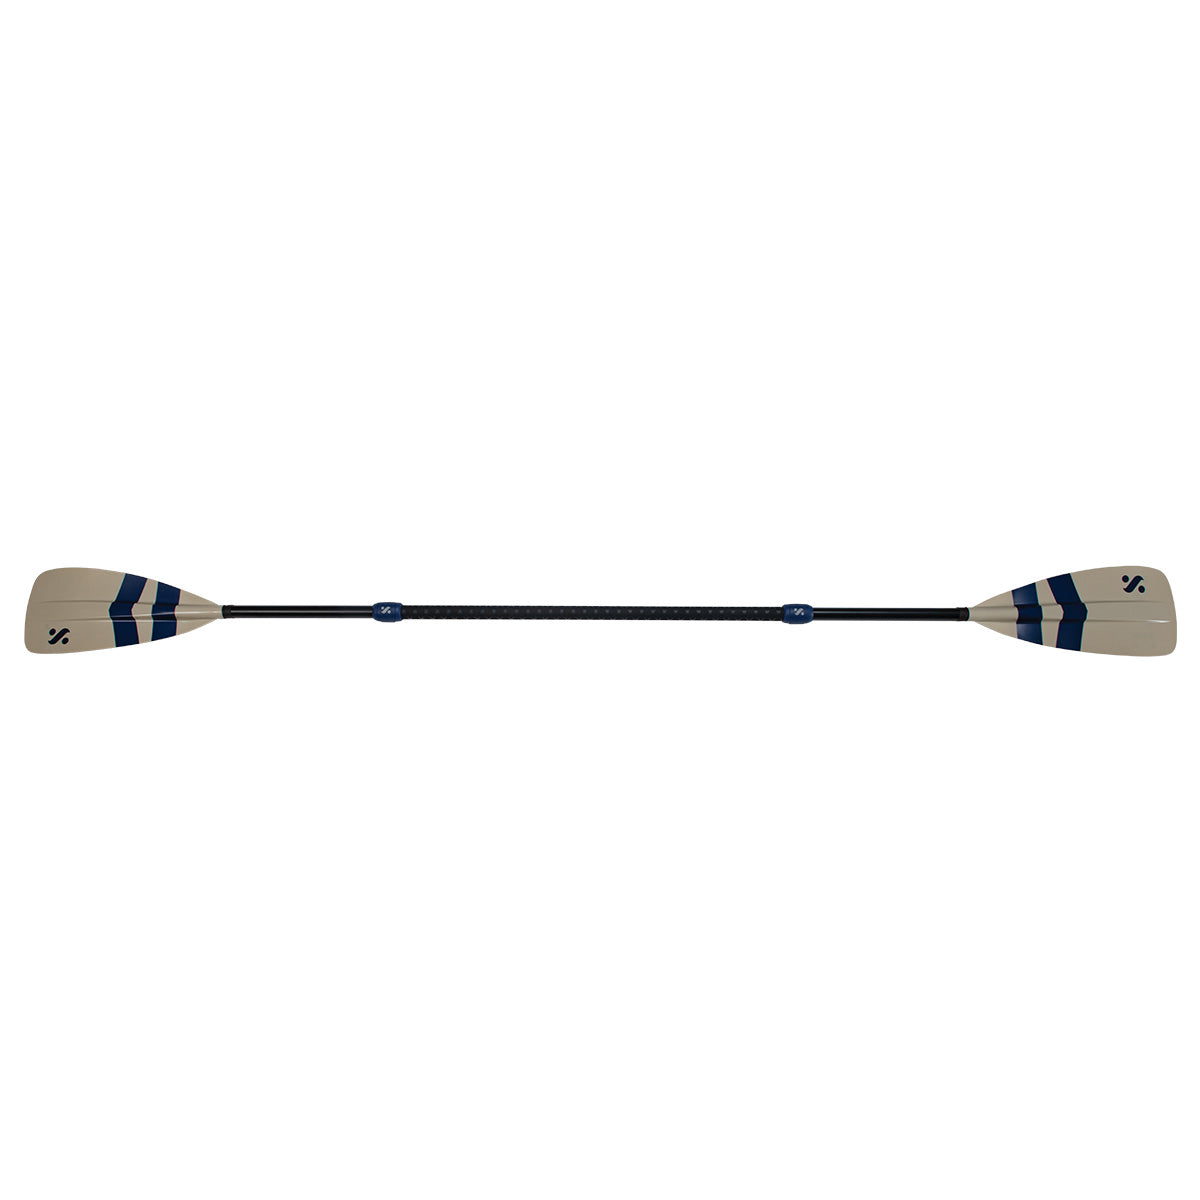 Remix Alloy 4 Piece SUP-Kayak Paddle in Sand